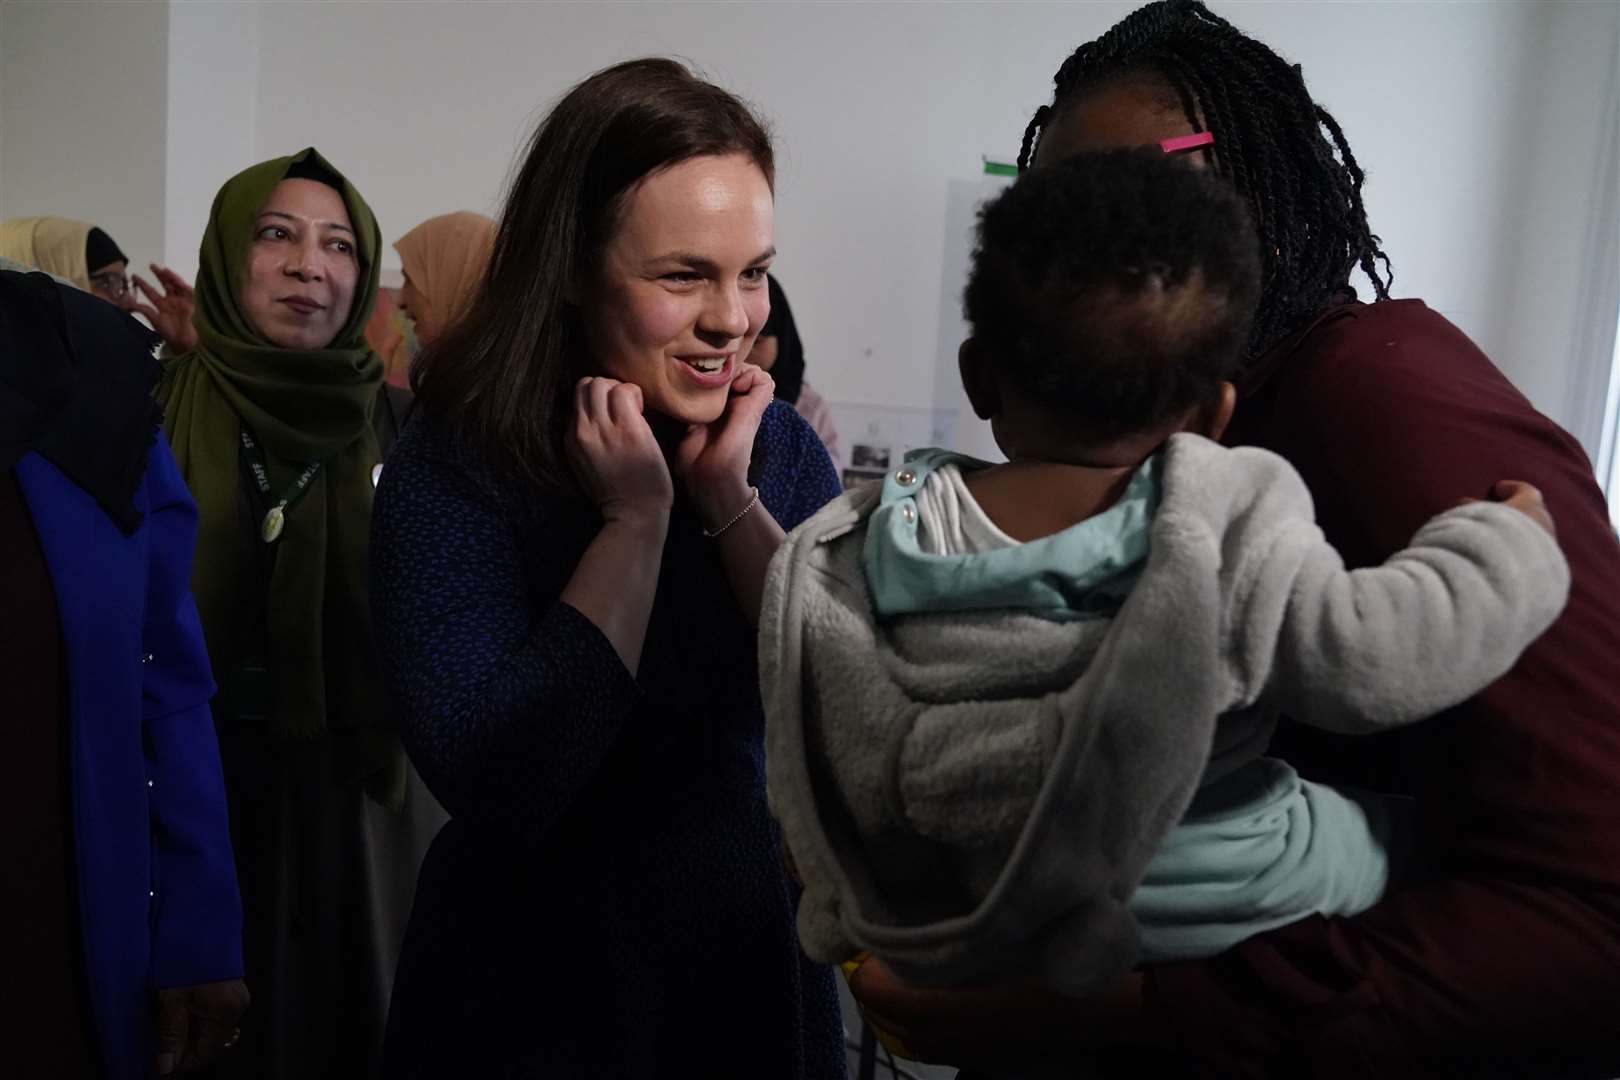 SNP leadership candidate Kate Forbes met families during a visit to the Empower Women for Change organisation in Glasgow (Andrew Milligan/PA)